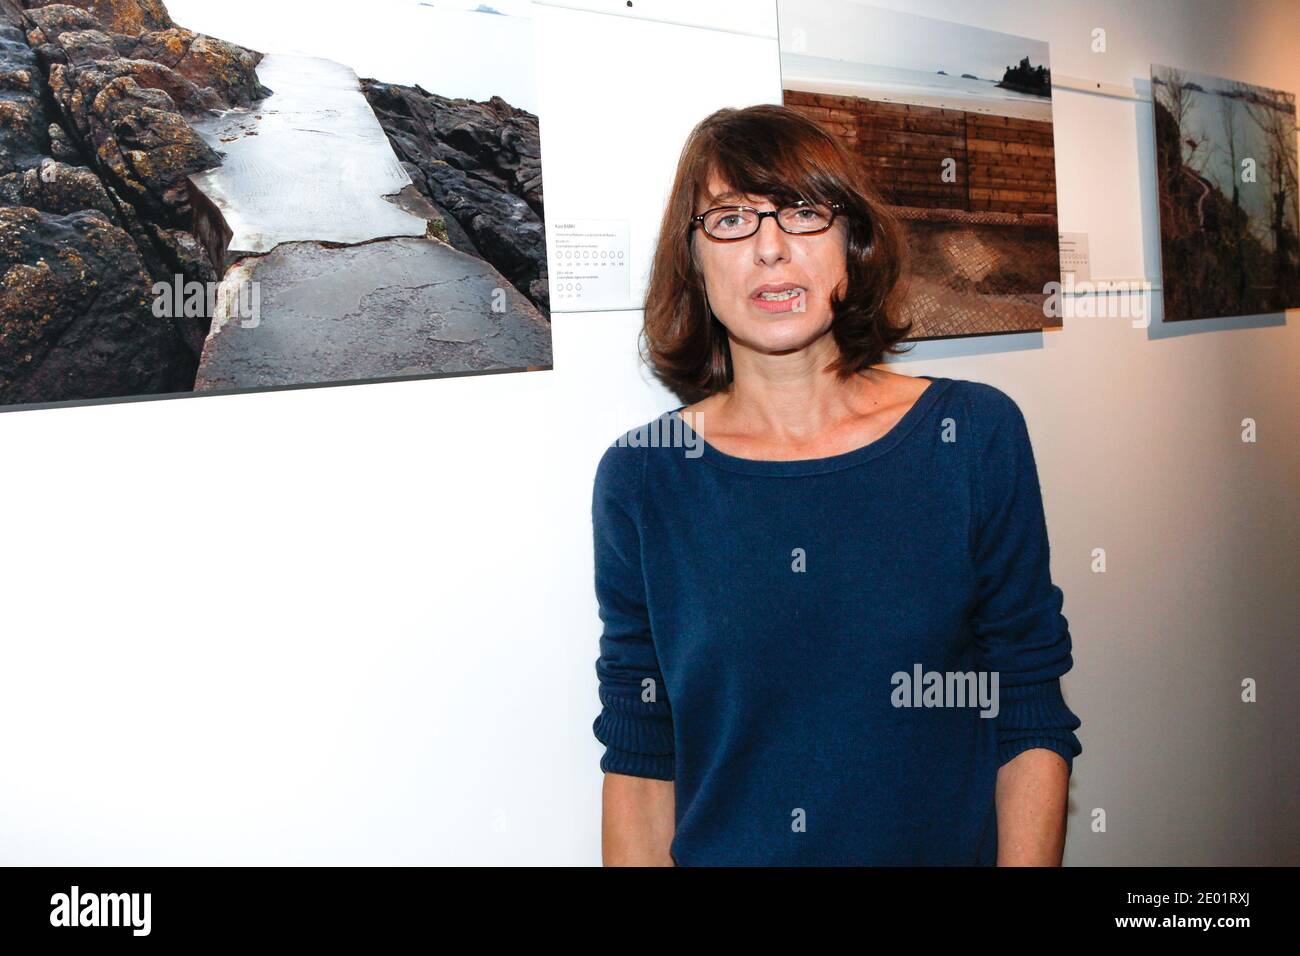 File photo of Kate Barry posing at her photos exhibition held at Zeartgallerie in Dinard, France on October 05, 2012. Photographer Kate Barry, daughter of actress and singer Jane Birkin, died today, december 11, 2013, around 18:30 after falling from the fourth floor of her Paris apartment. Kate Barry was the daughter of Jane Birkin and British composer John Barry, best known for writing the soundtrack of many James Bond, who died in 2011. She was the half-sister of actresses Charlotte Gainsbourg and Lou Doillon. Photo by Audrey Poree/ABACAPRESS.COM Stock Photo